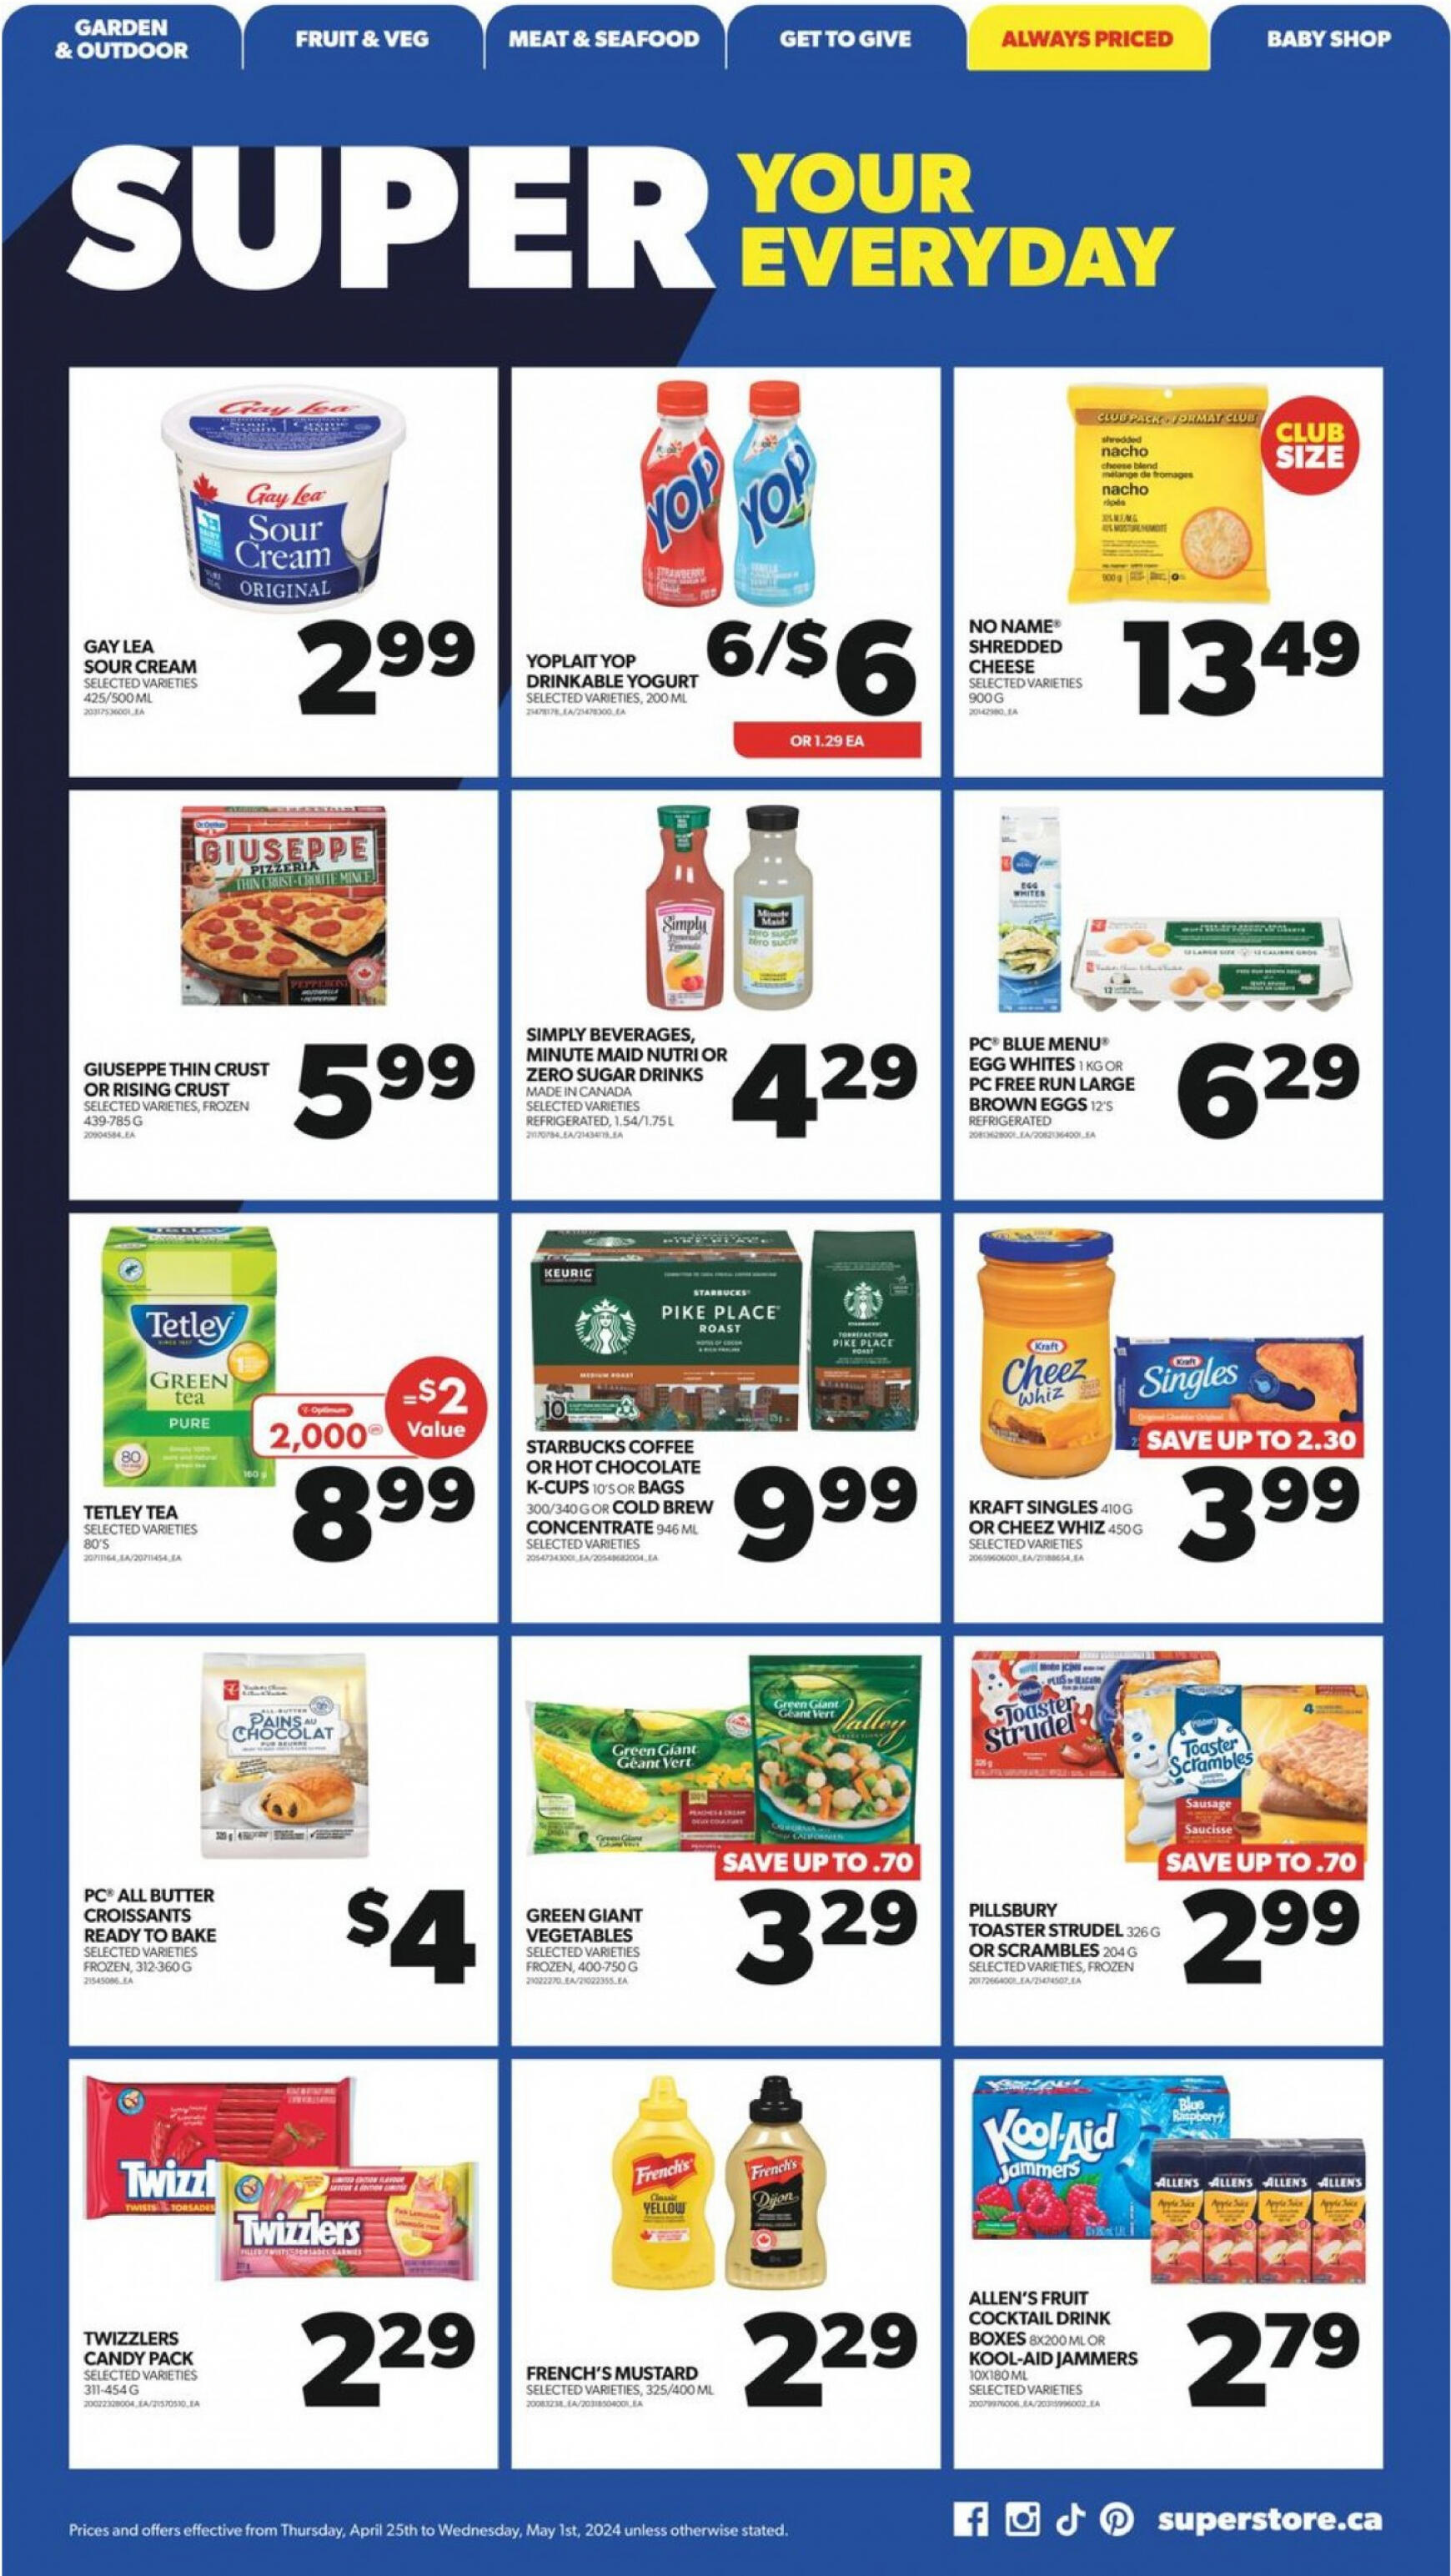 real-canadian-superstore - Real Canadian Superstore flyer current 01.05. - 31.05. - page: 20